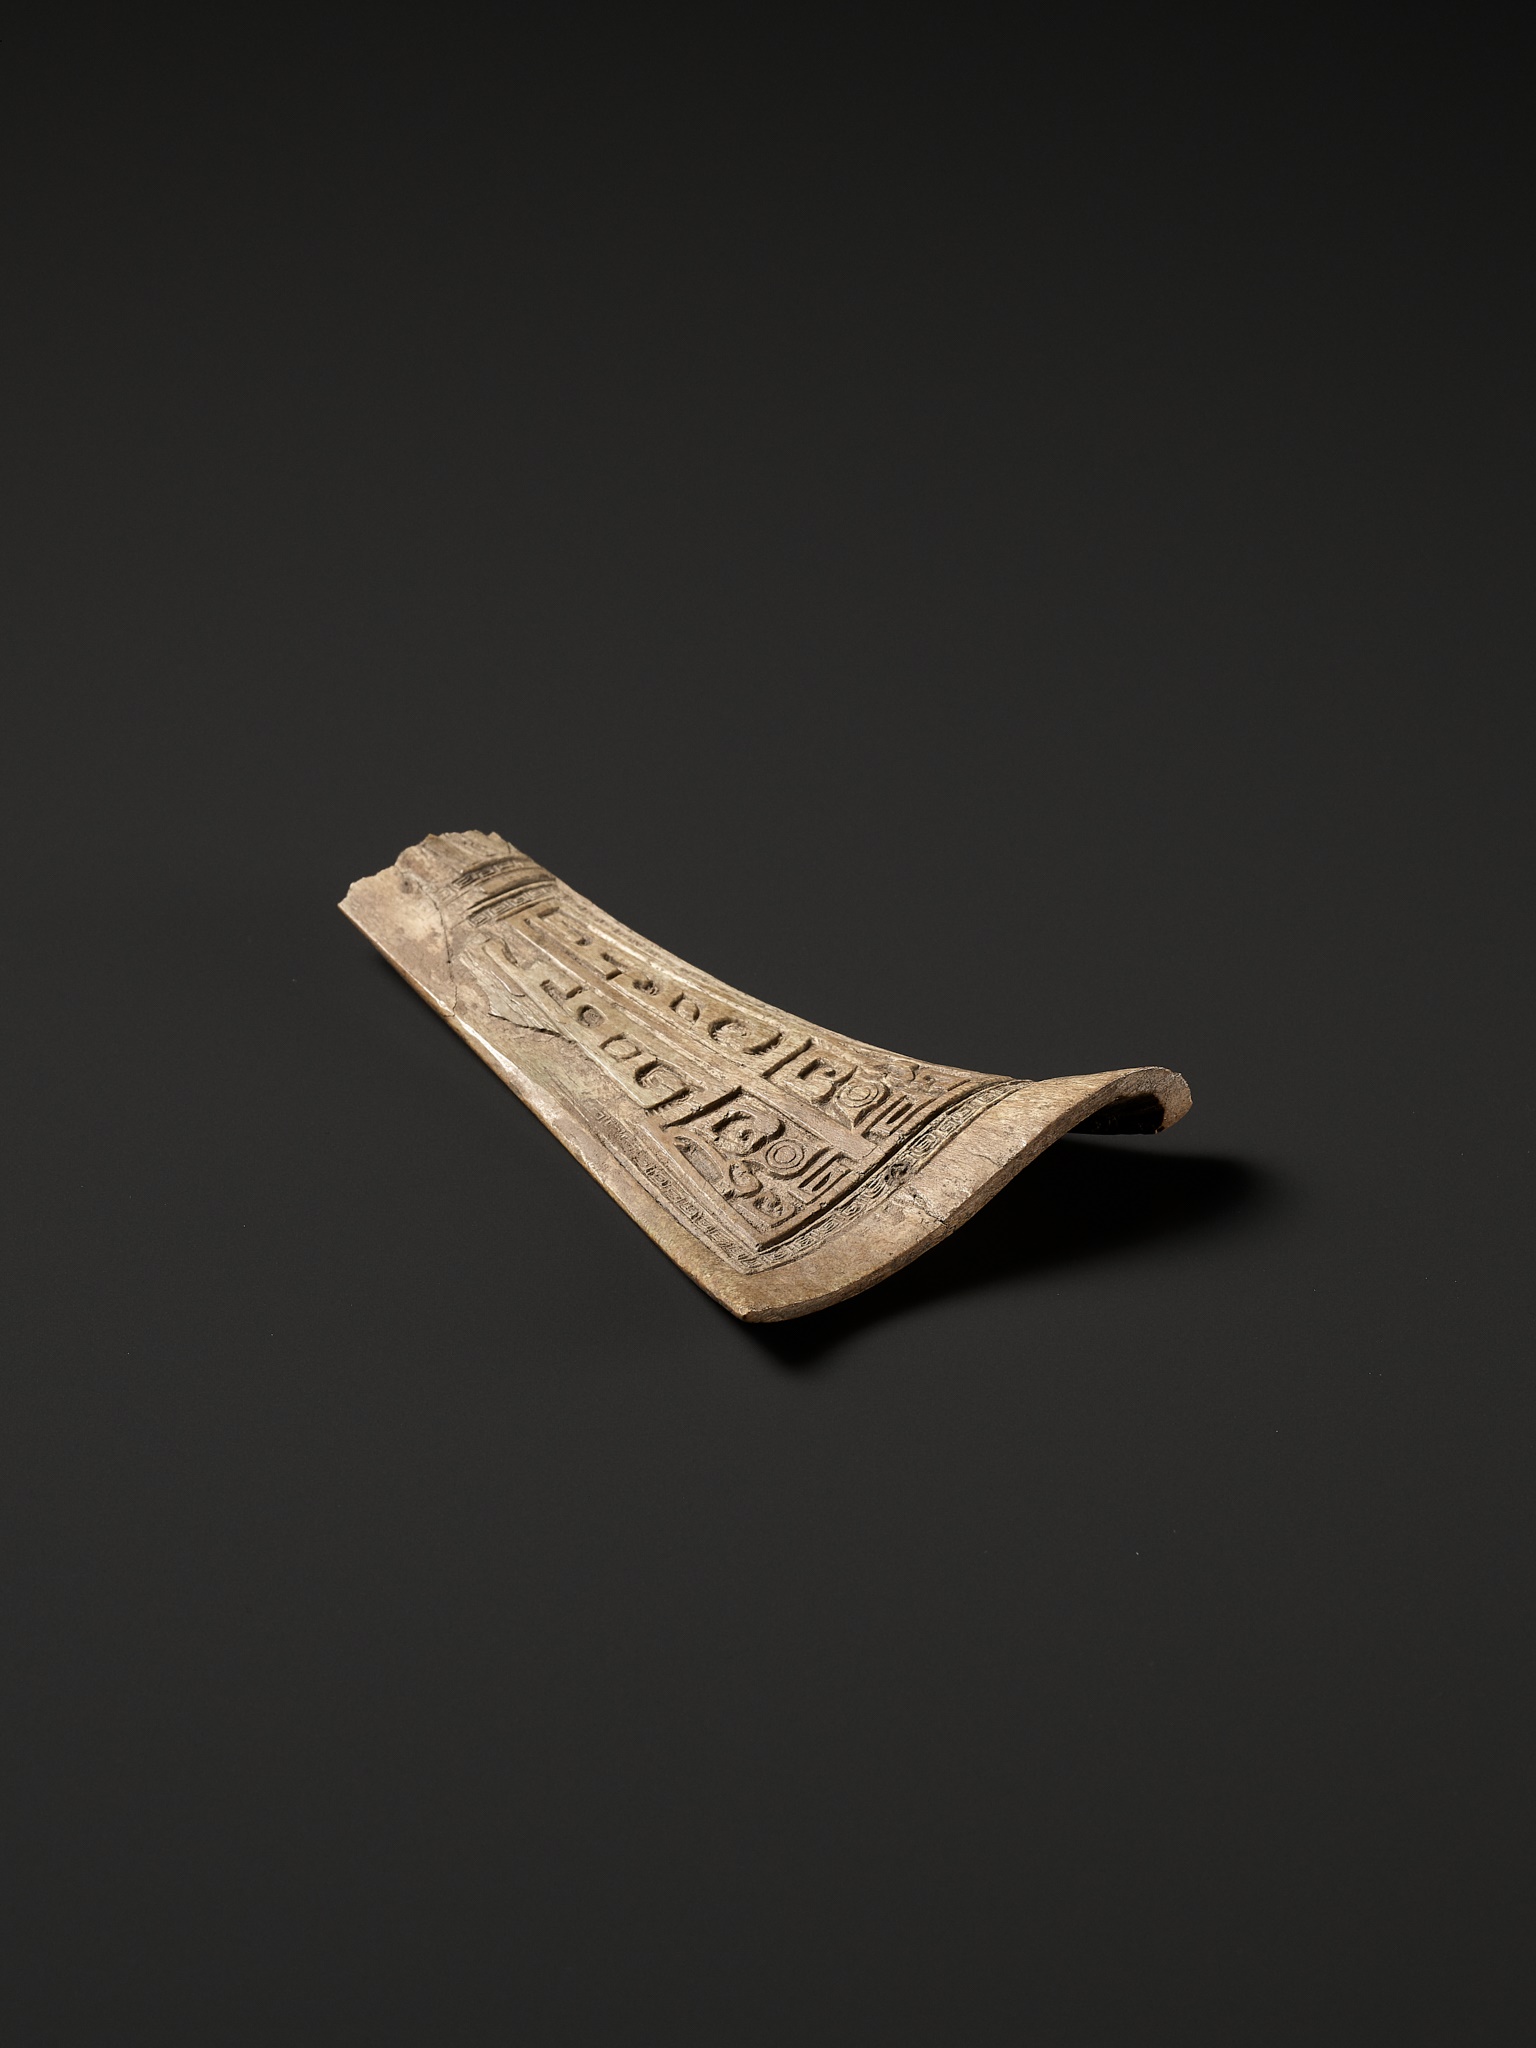 AN ARCHAIC CEREMONIAL BONE CARVING, SHANG DYNASTY - Image 8 of 16